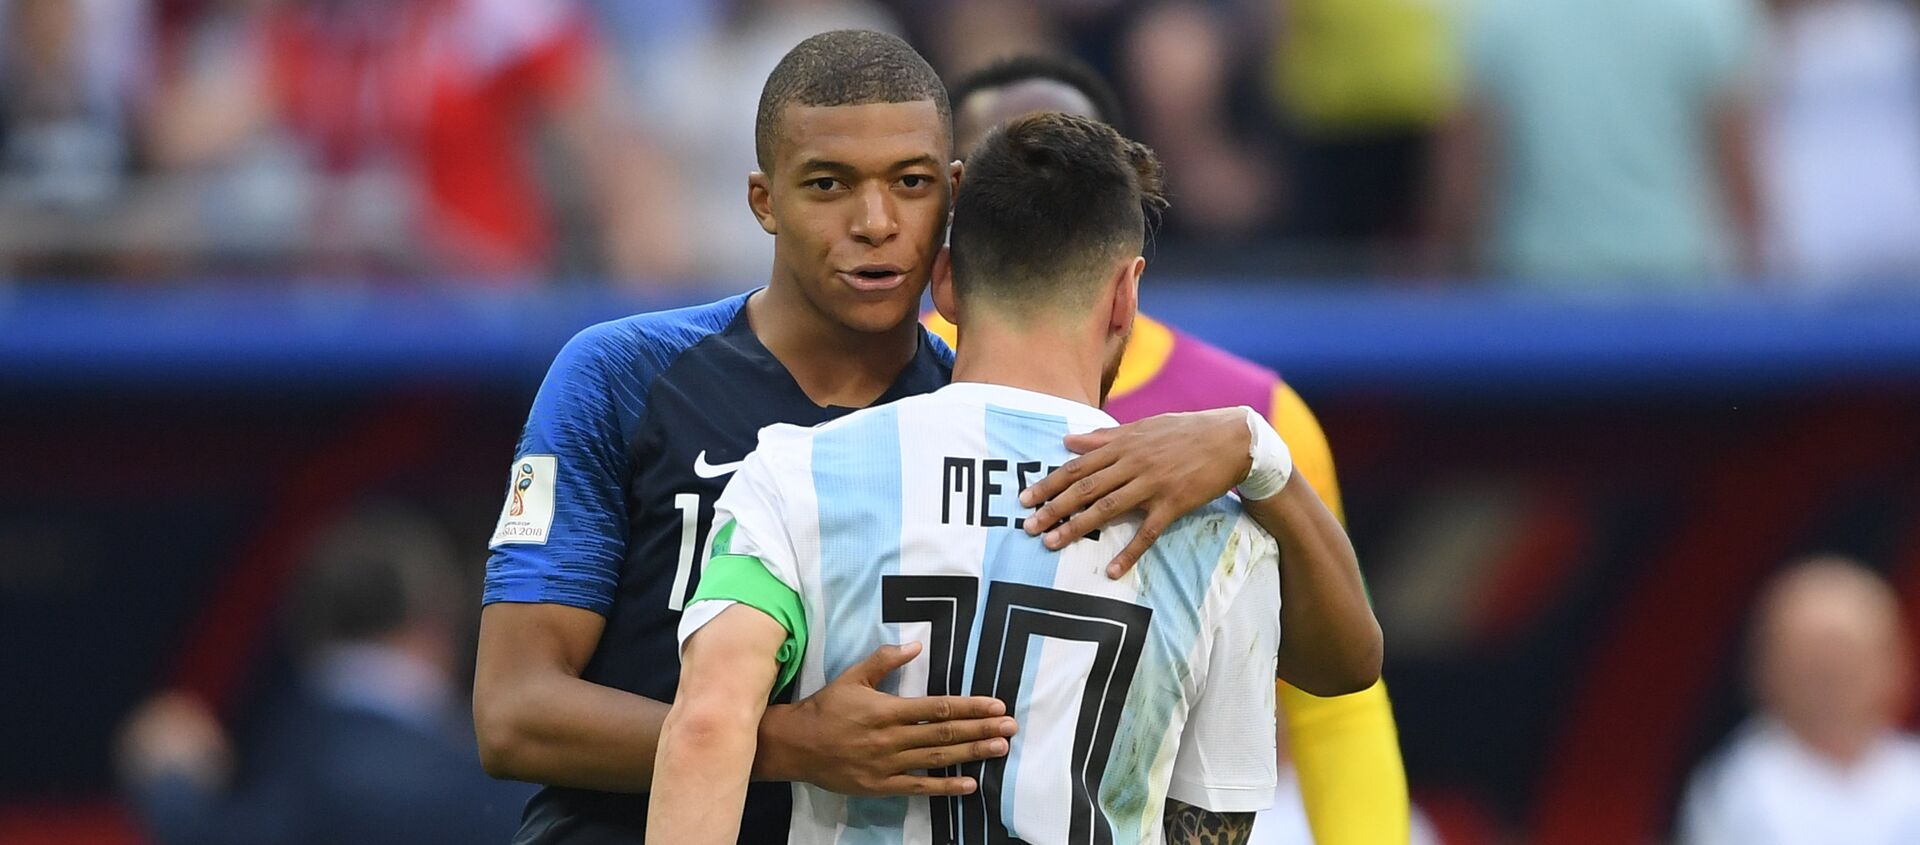 France's Kylian Mbappe, left, comforts Argentina's Lionel Messi after France's 4:3 victory in the World Cup Round of 16 soccer match between France and Argentina, at the Kazan Arena, in Kazan, Russia, June 30, 2018 - اسپوتنیک افغانستان  , 1920, 06.08.2021